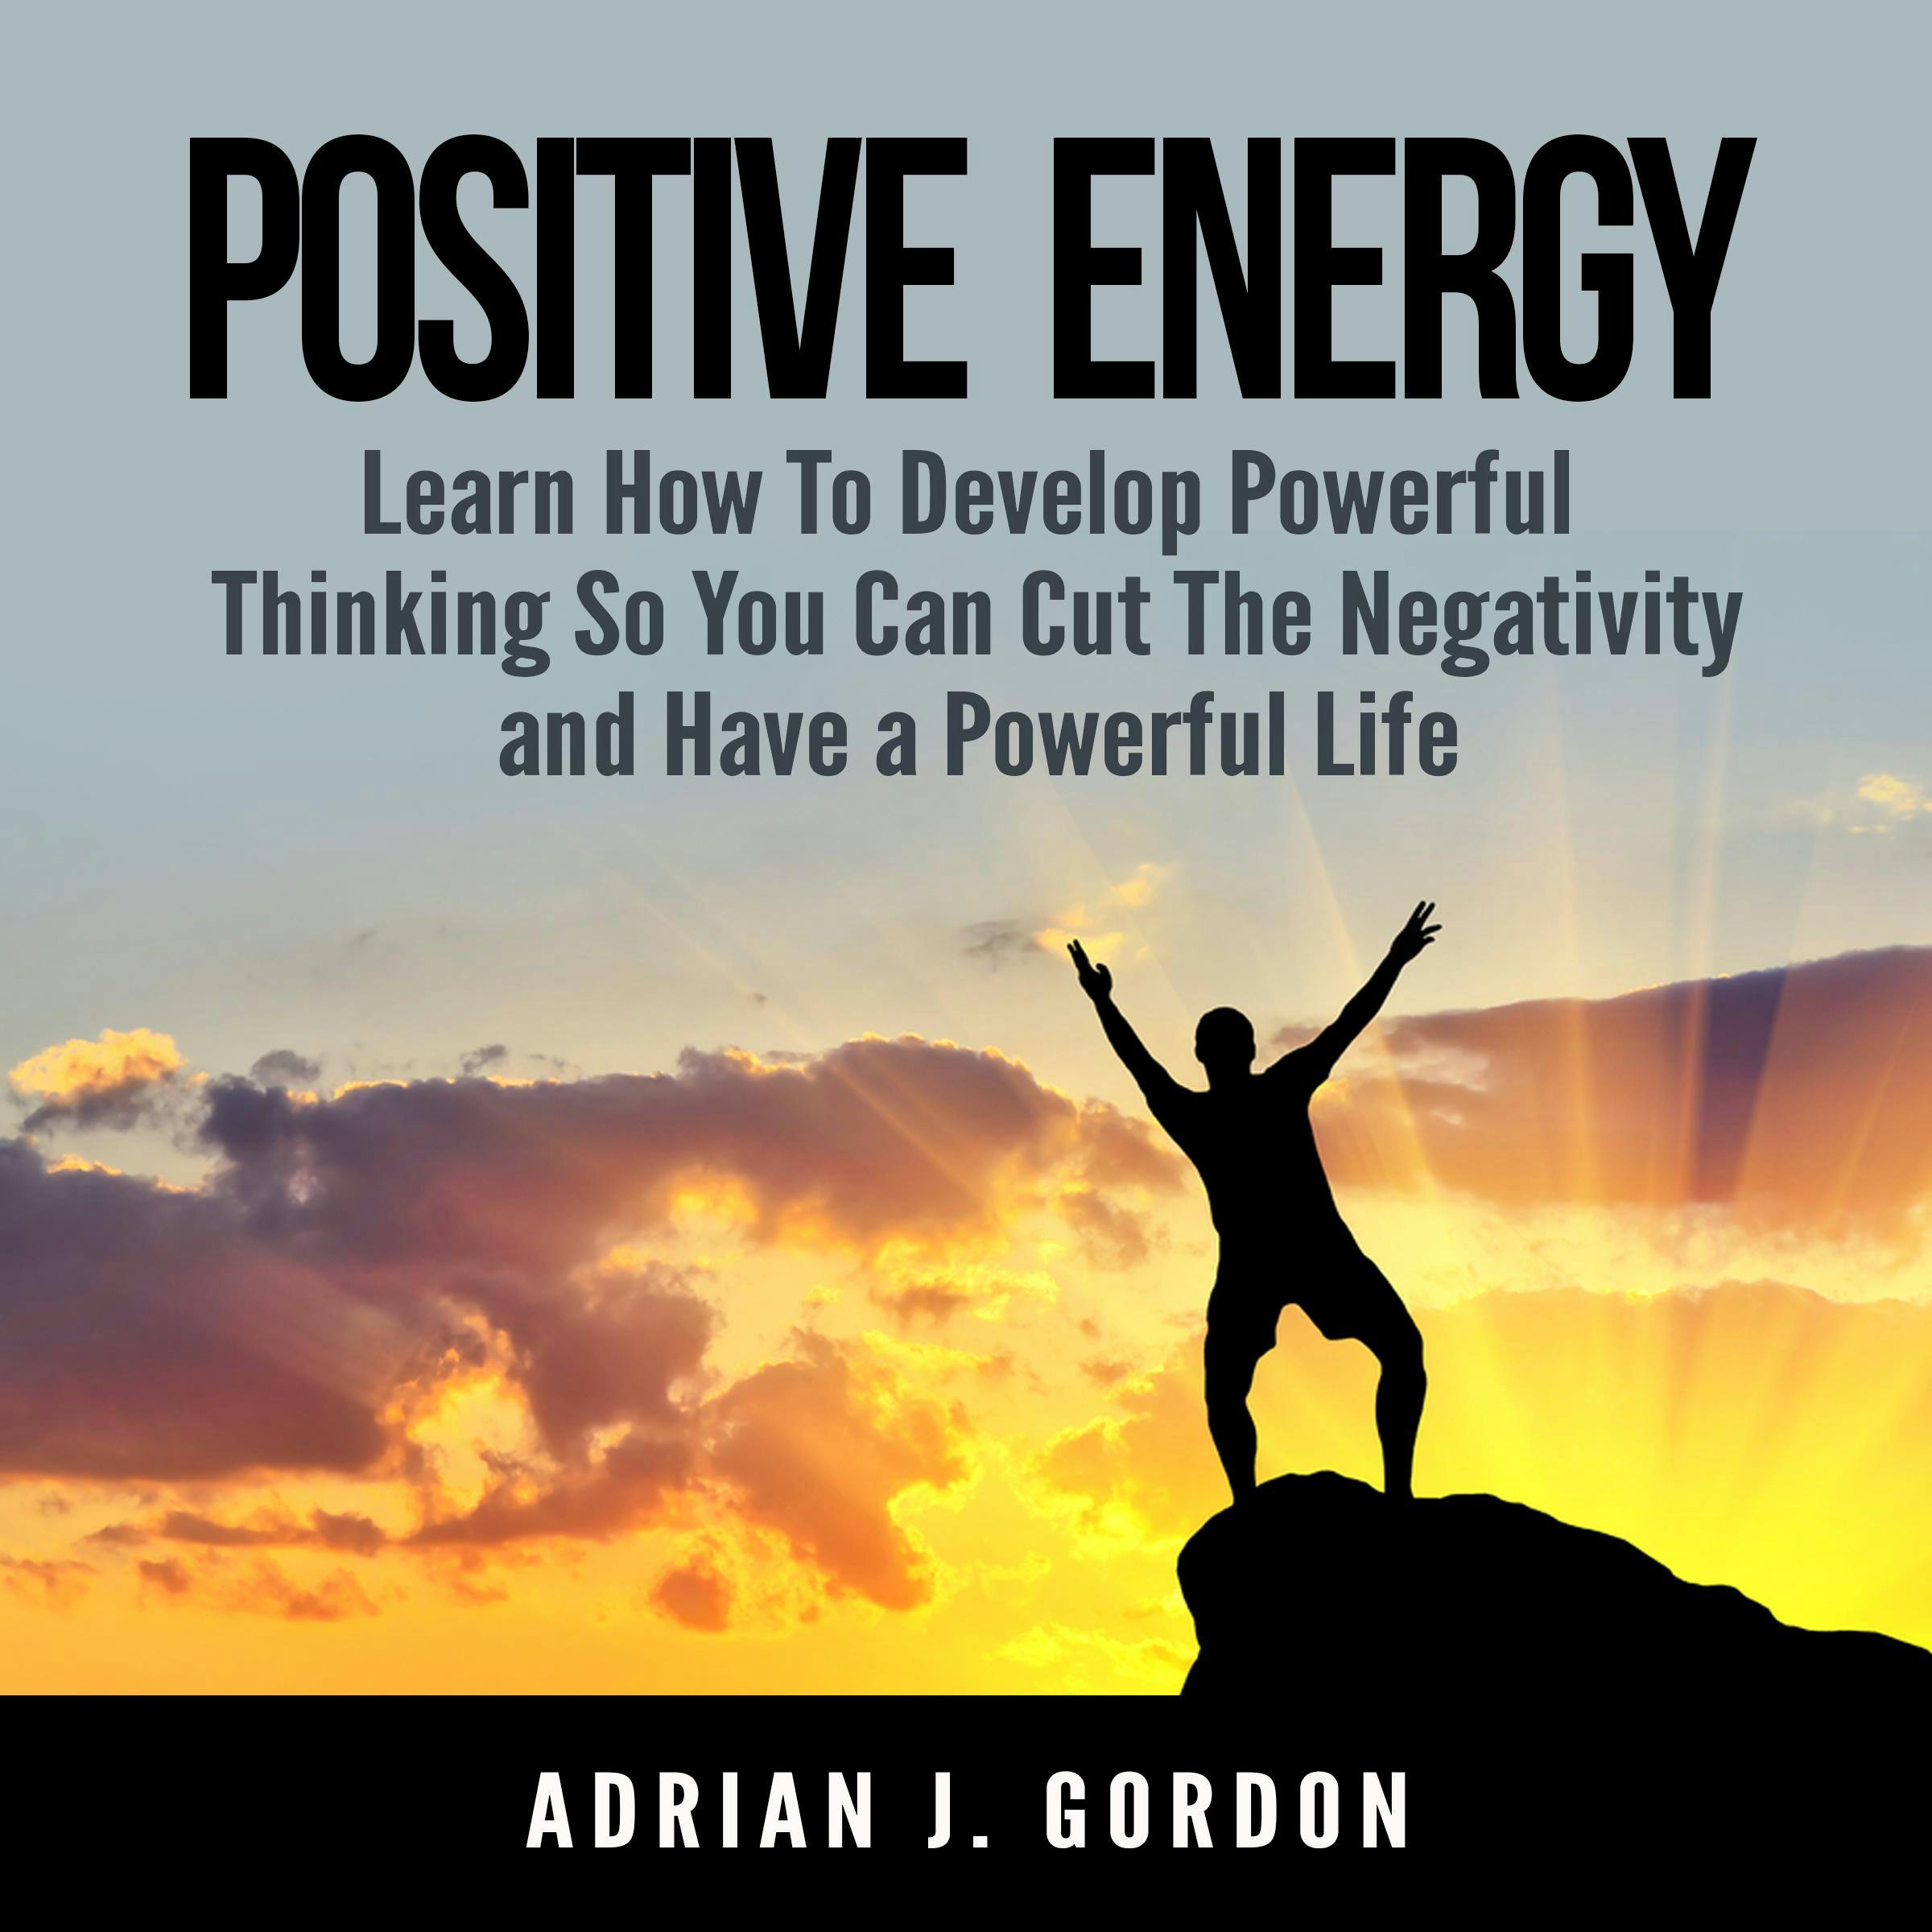 Positive Energy: Learn How To Develop Powerful Thinking So You Can Cut The Negativity and Have a Powerful Life - Adrian J. Gordon